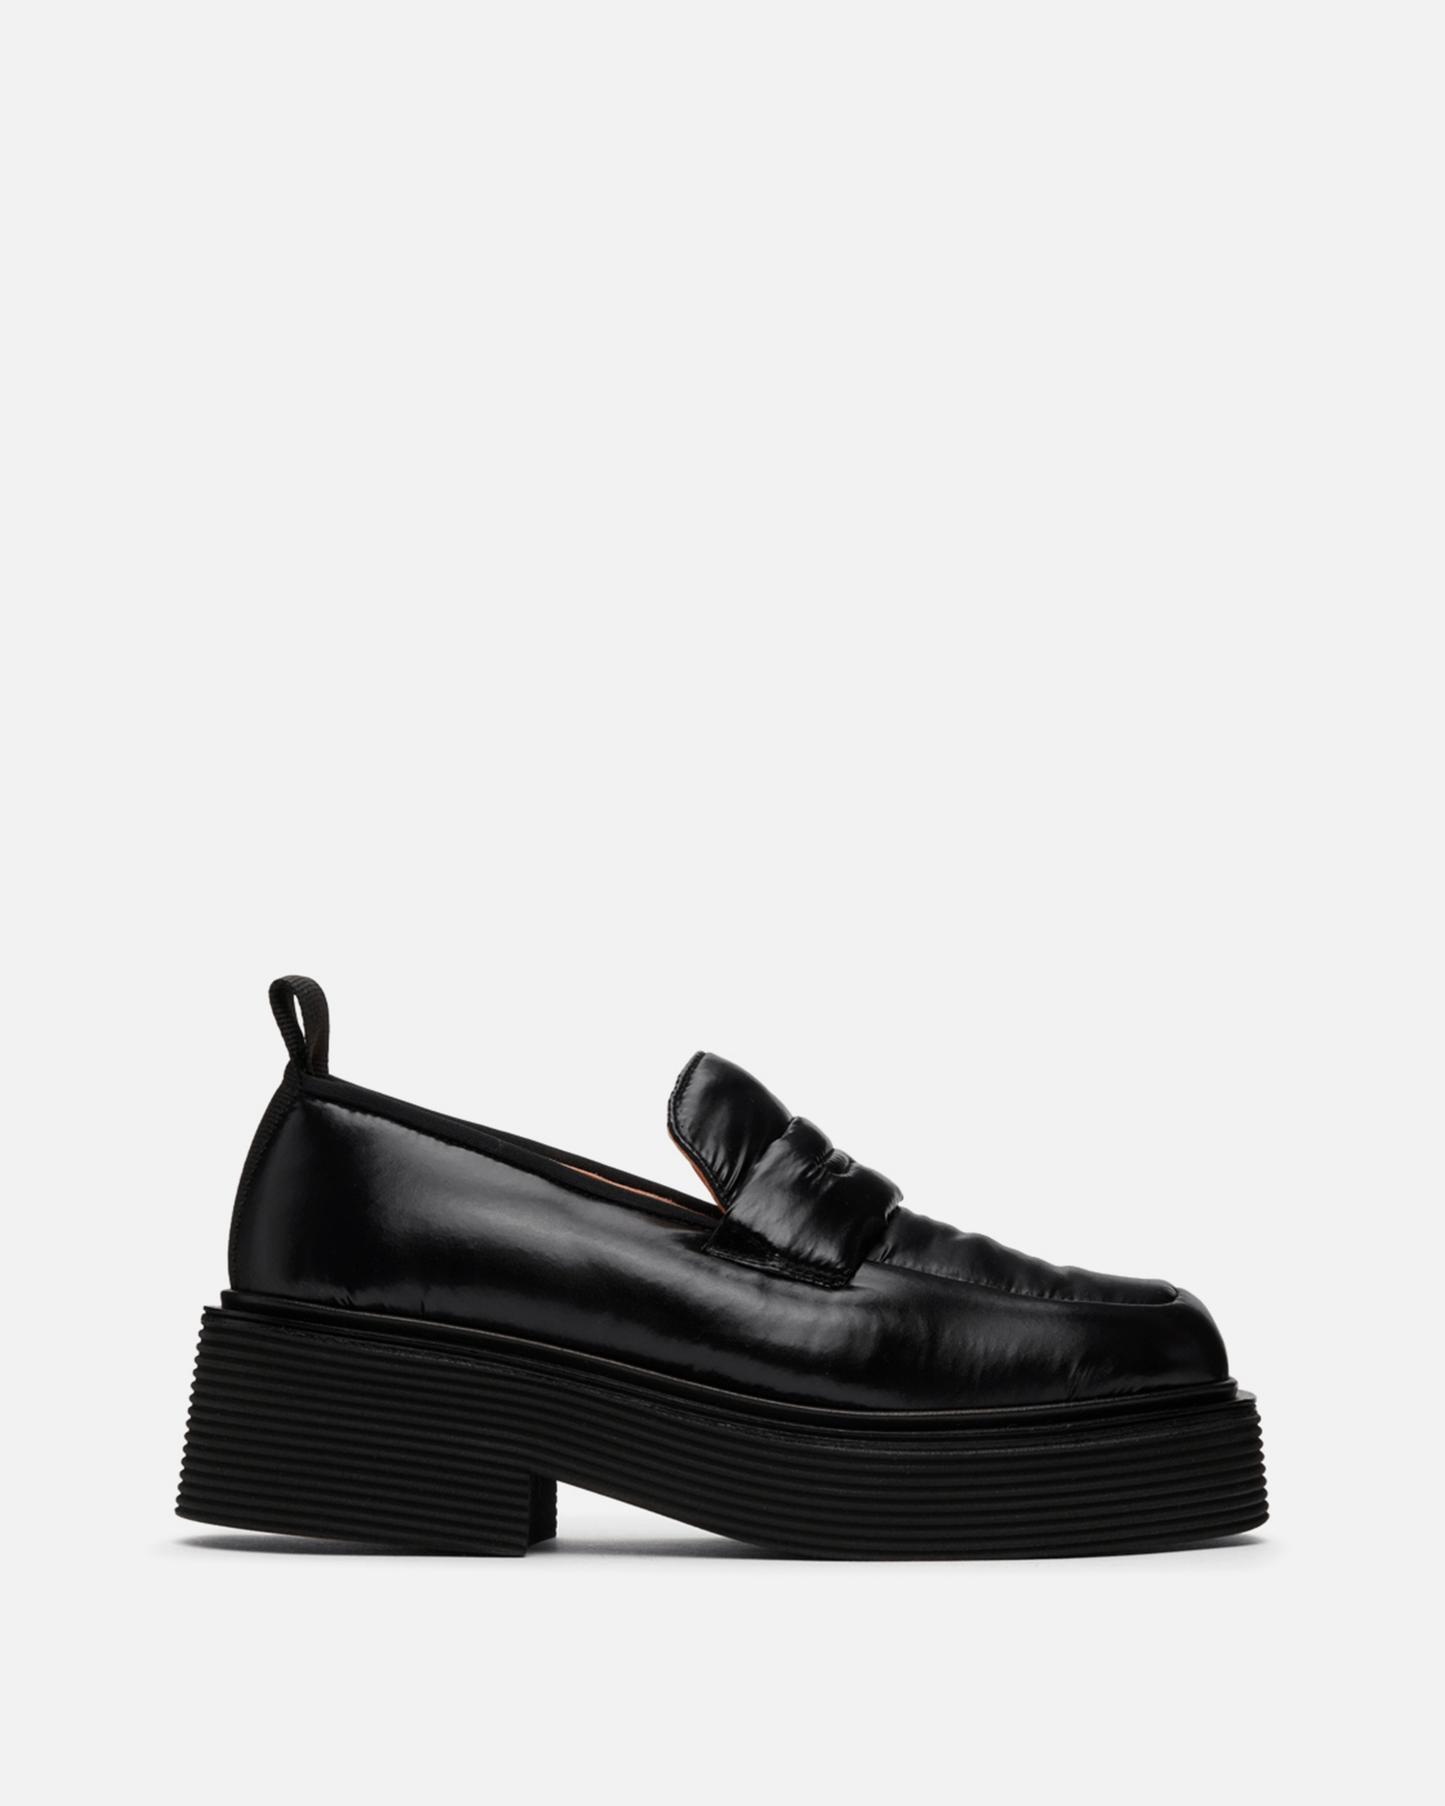 Marni Men's Shoes Padded Square Toe Loafer in Black